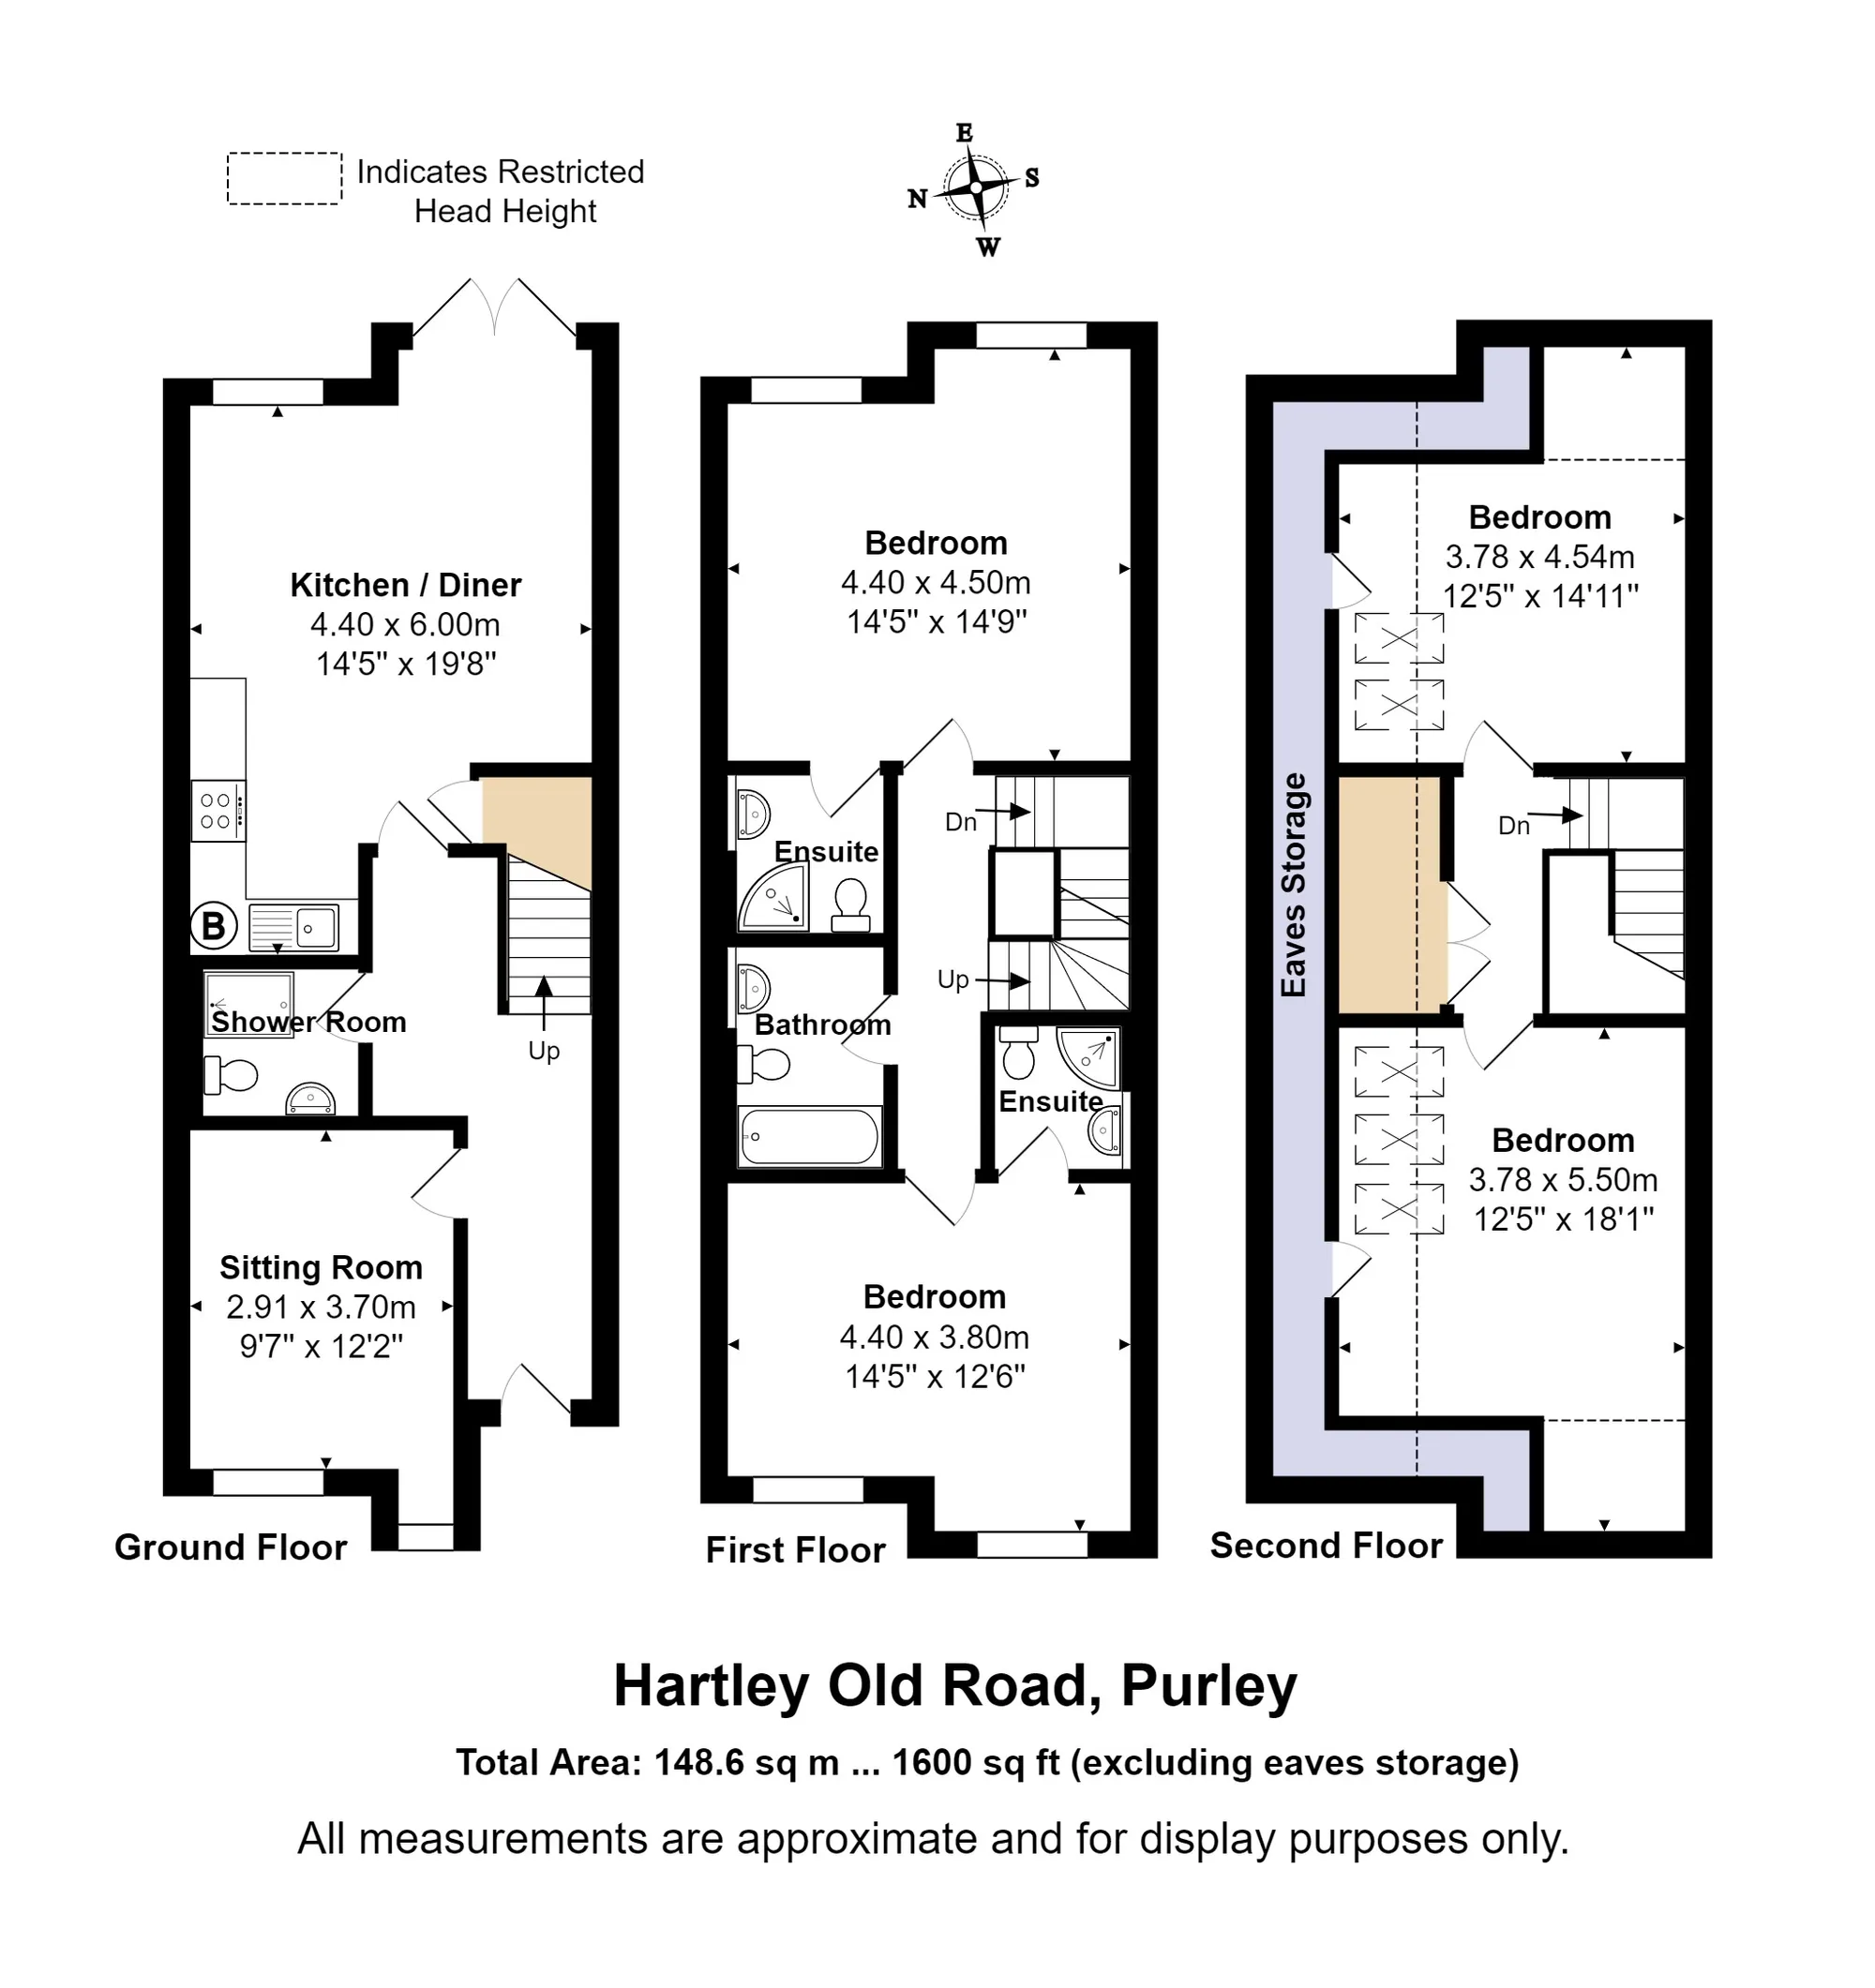 4 bed for sale in Hartley Old Road, Purley - Property floorplan